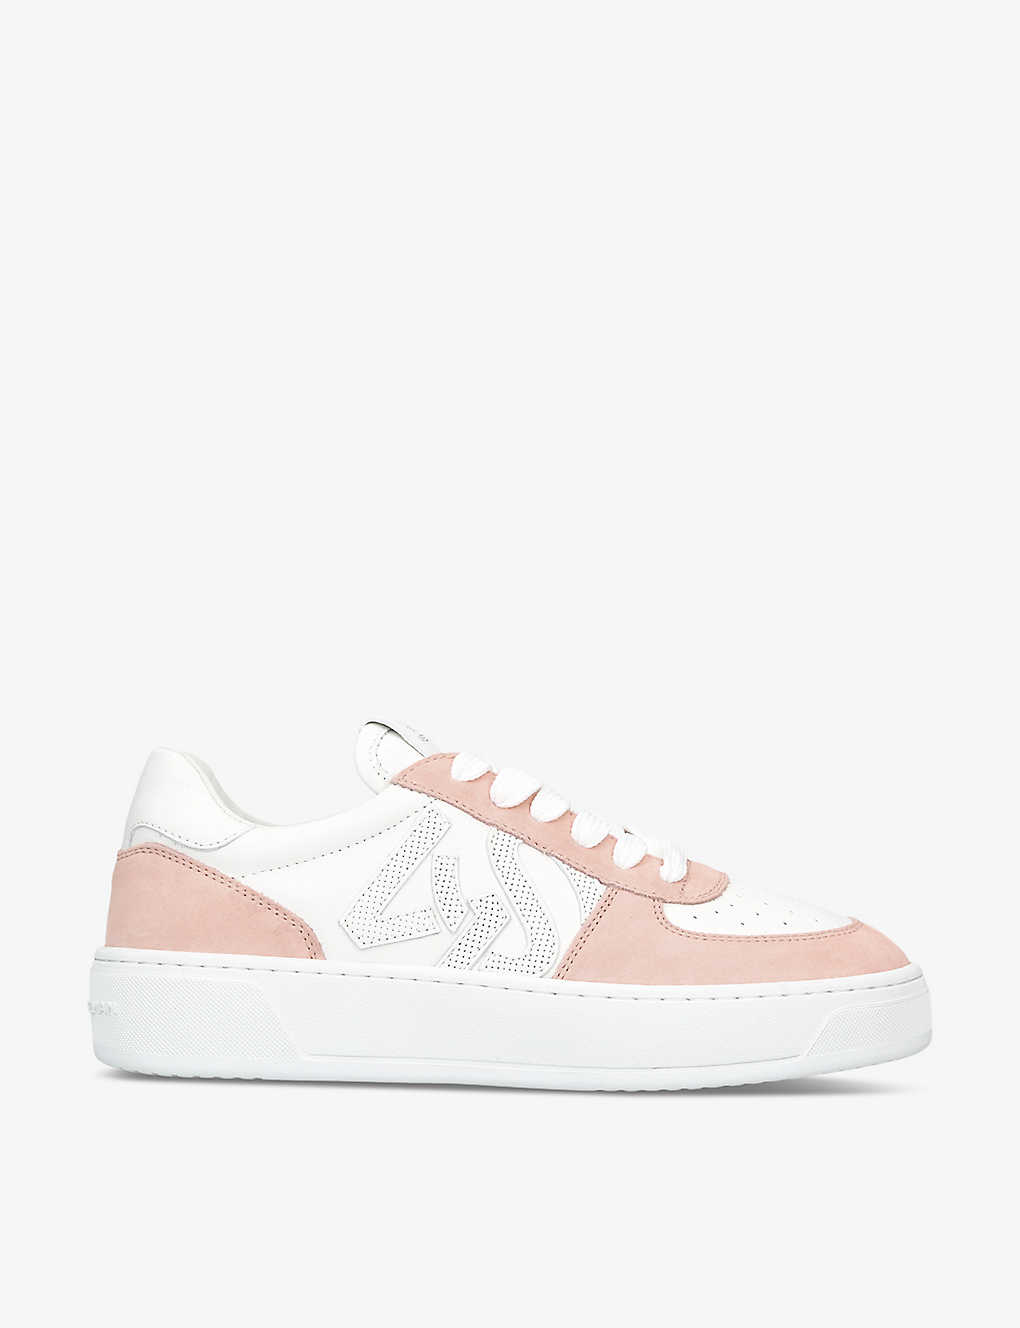 Shop Stuart Weitzman Women's White/oth Sw Courtside Monogram Leather And Suede Trainers